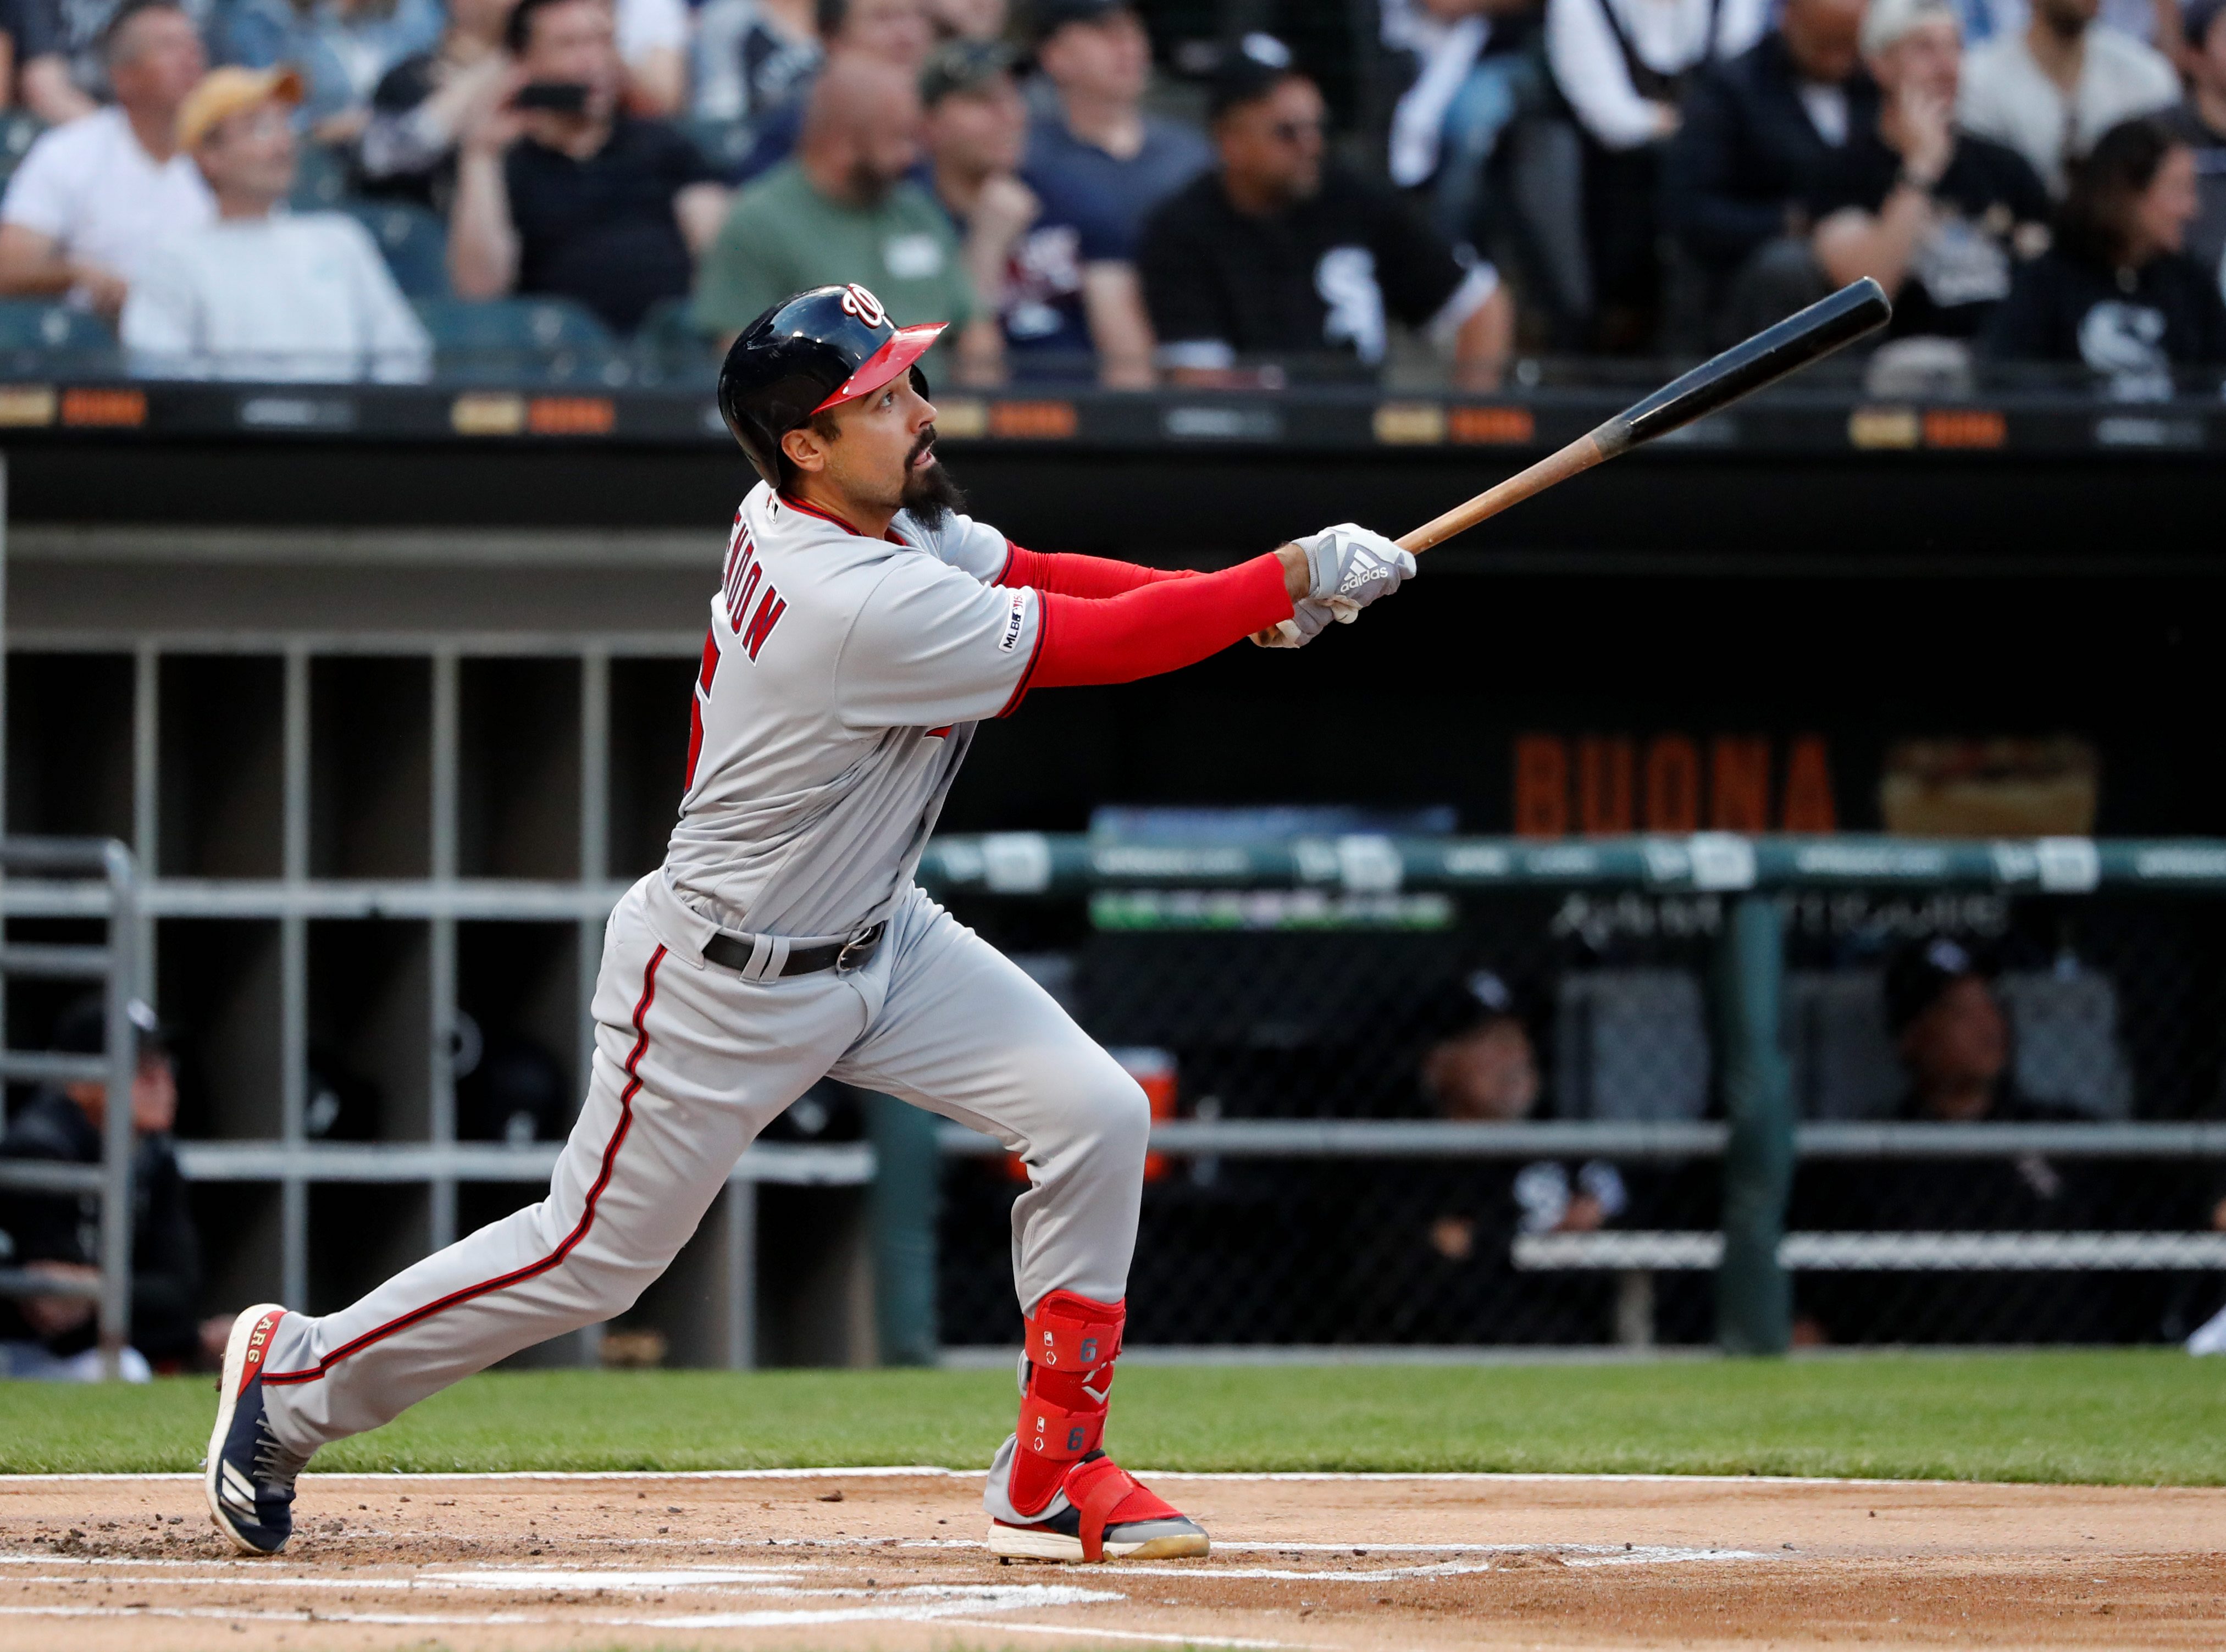 Anthony Rendon is right about All-Star 